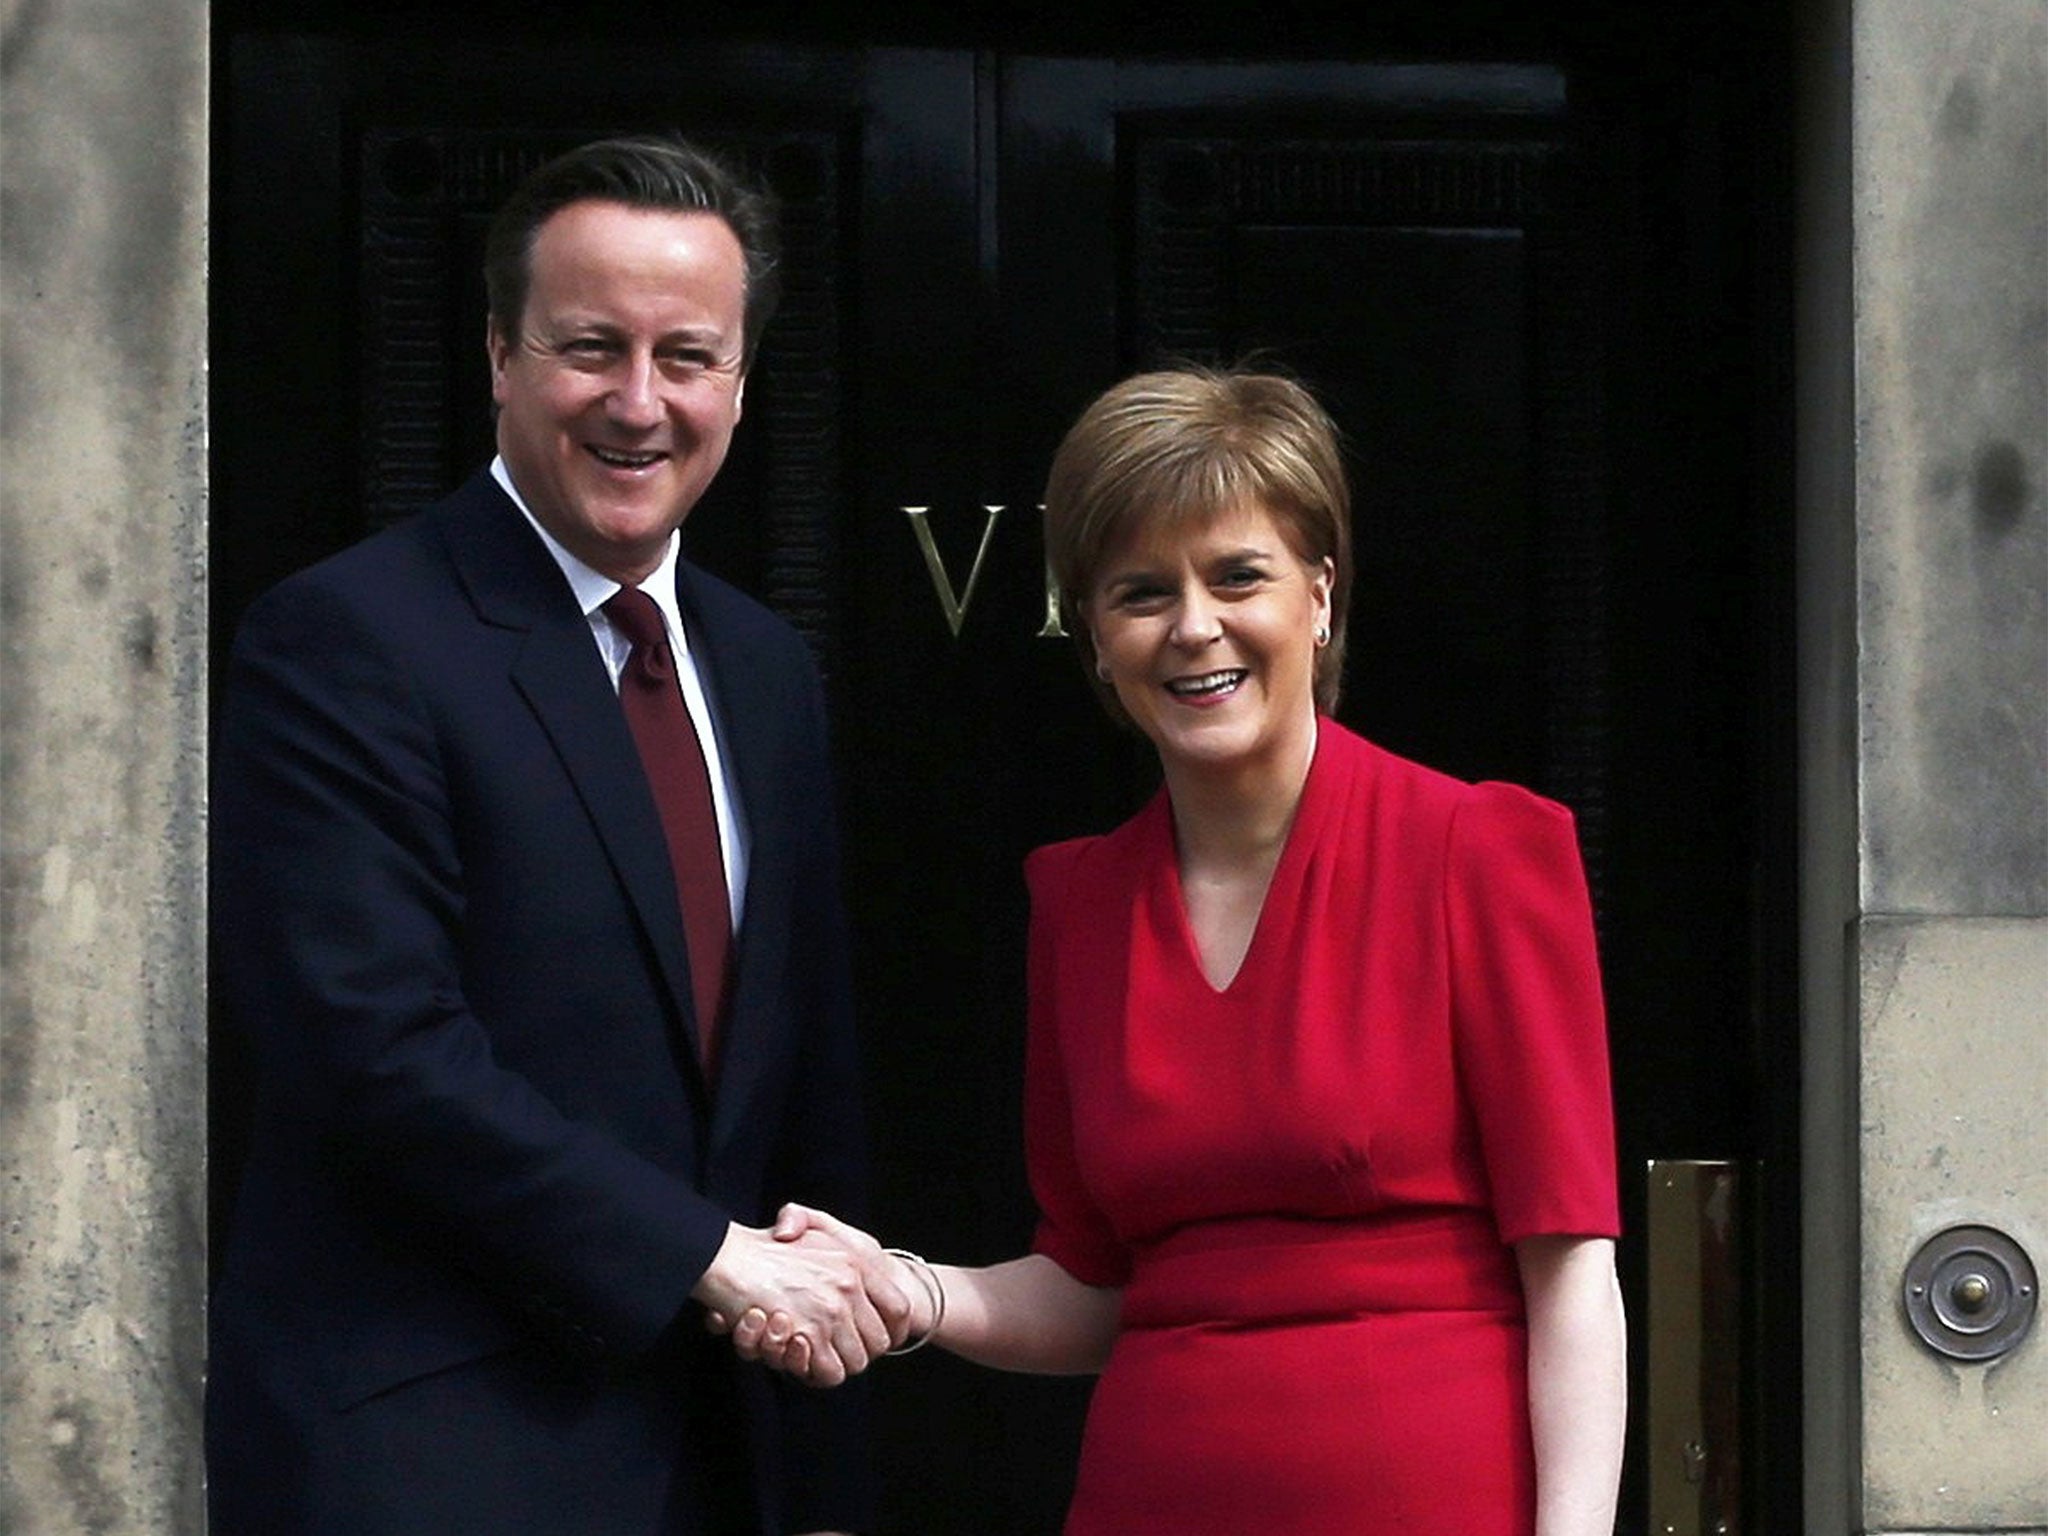 David Cameron ruled out a second independence referendum during his meeting with Nicola Sturgeon in Edinburgh